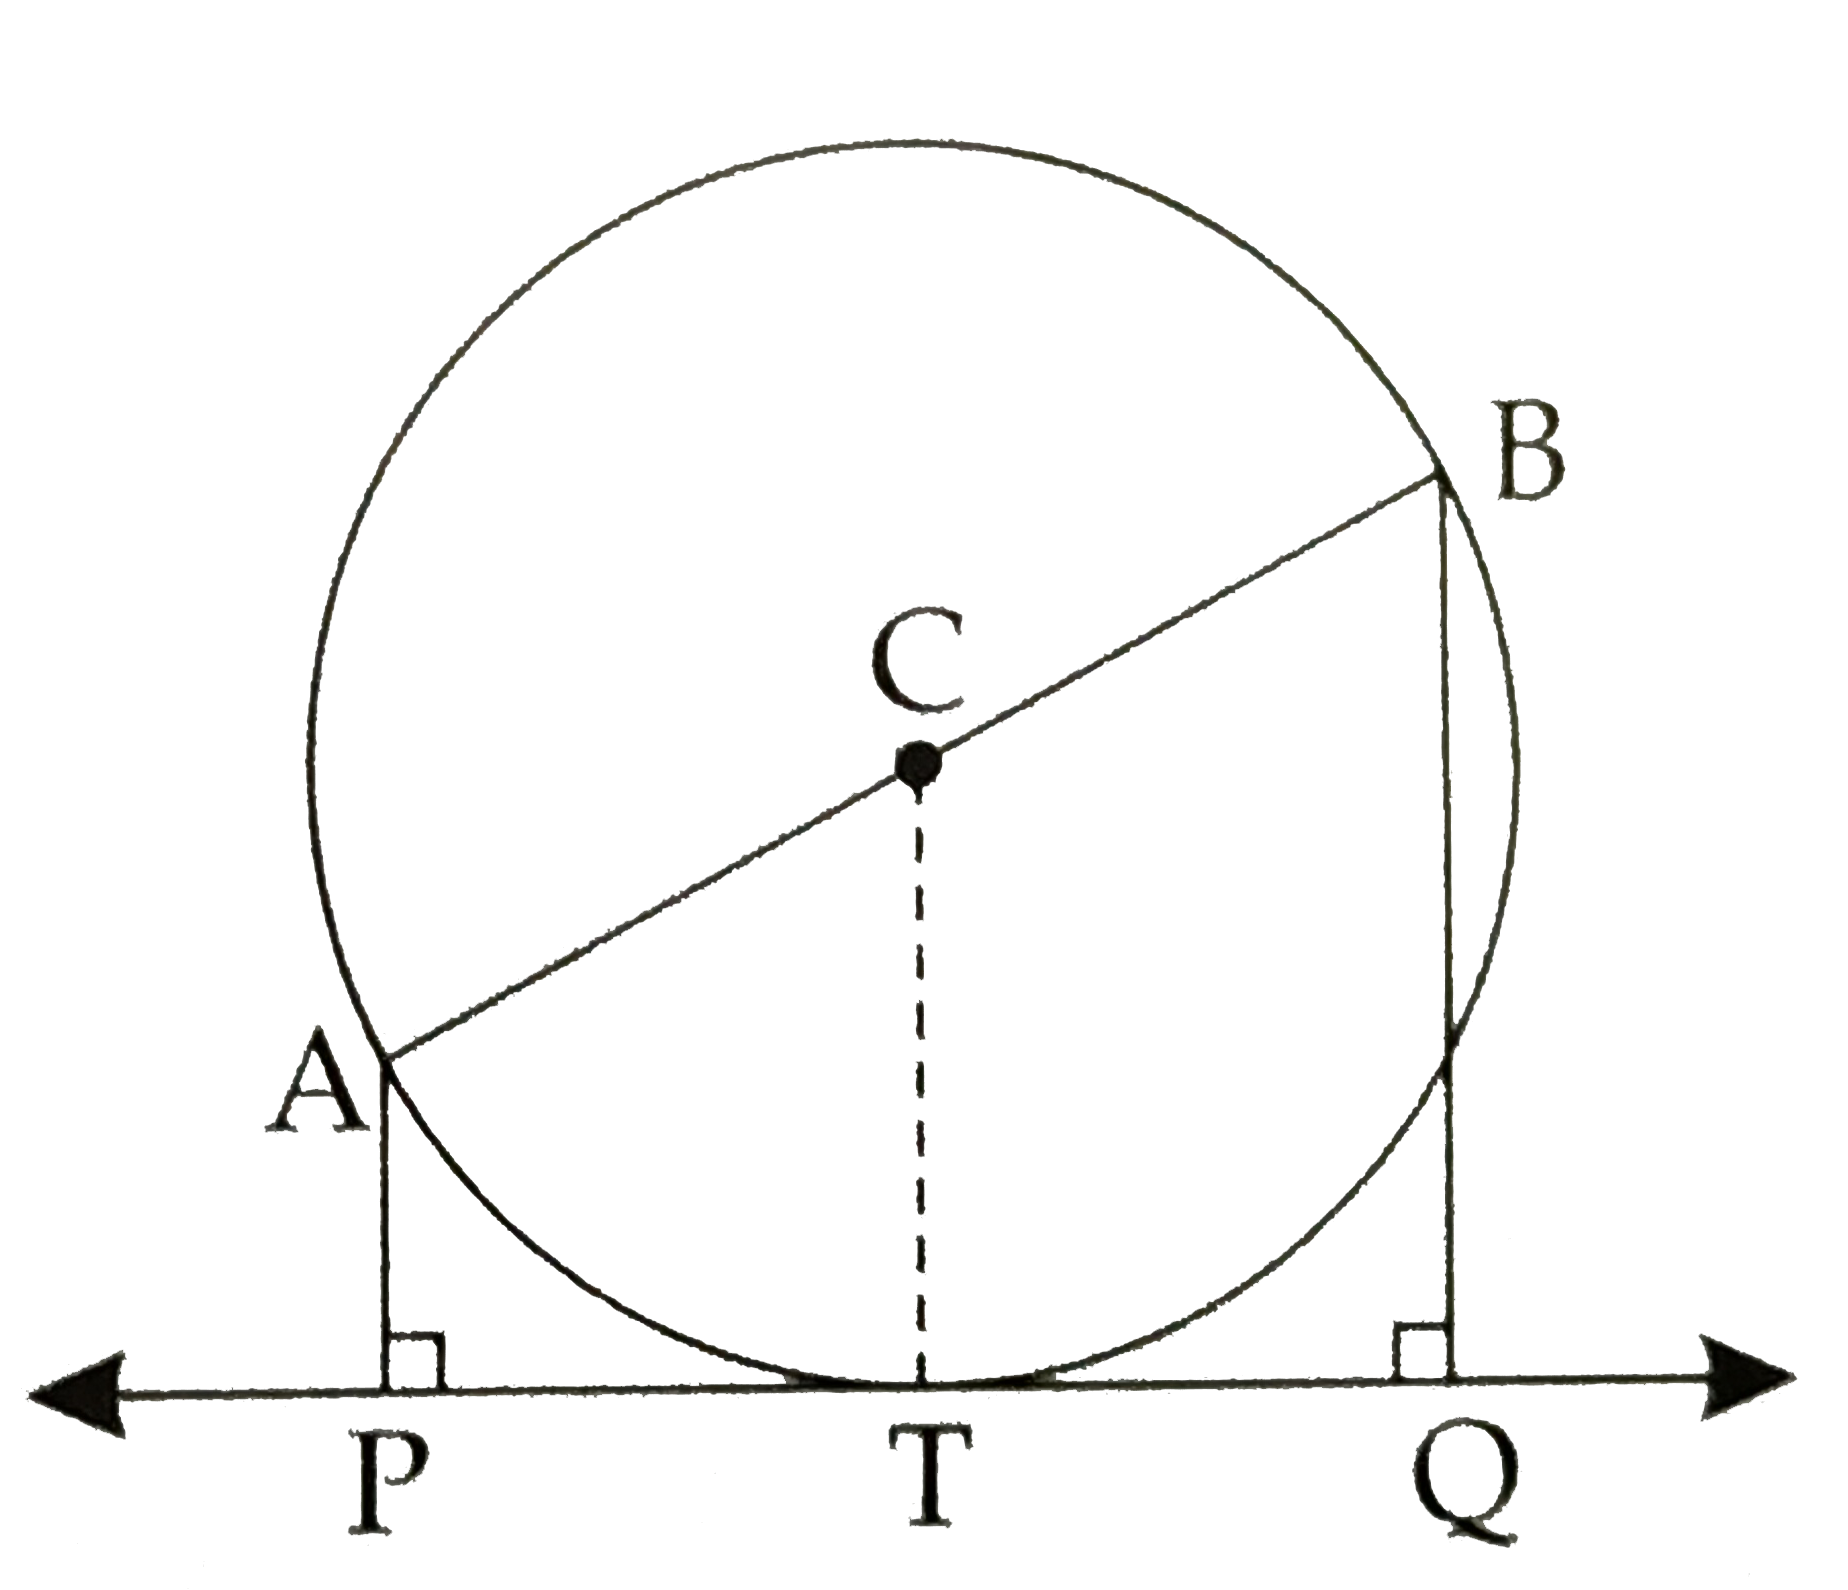 In  the adjoining figure, seg AB is a diameter of a circle with centre C . Line  PQ is a tangent, it touhces the circle at T. segs AP and BQ are perpendiculars to line PQ. Prove seg CP ~= seg  CQ .